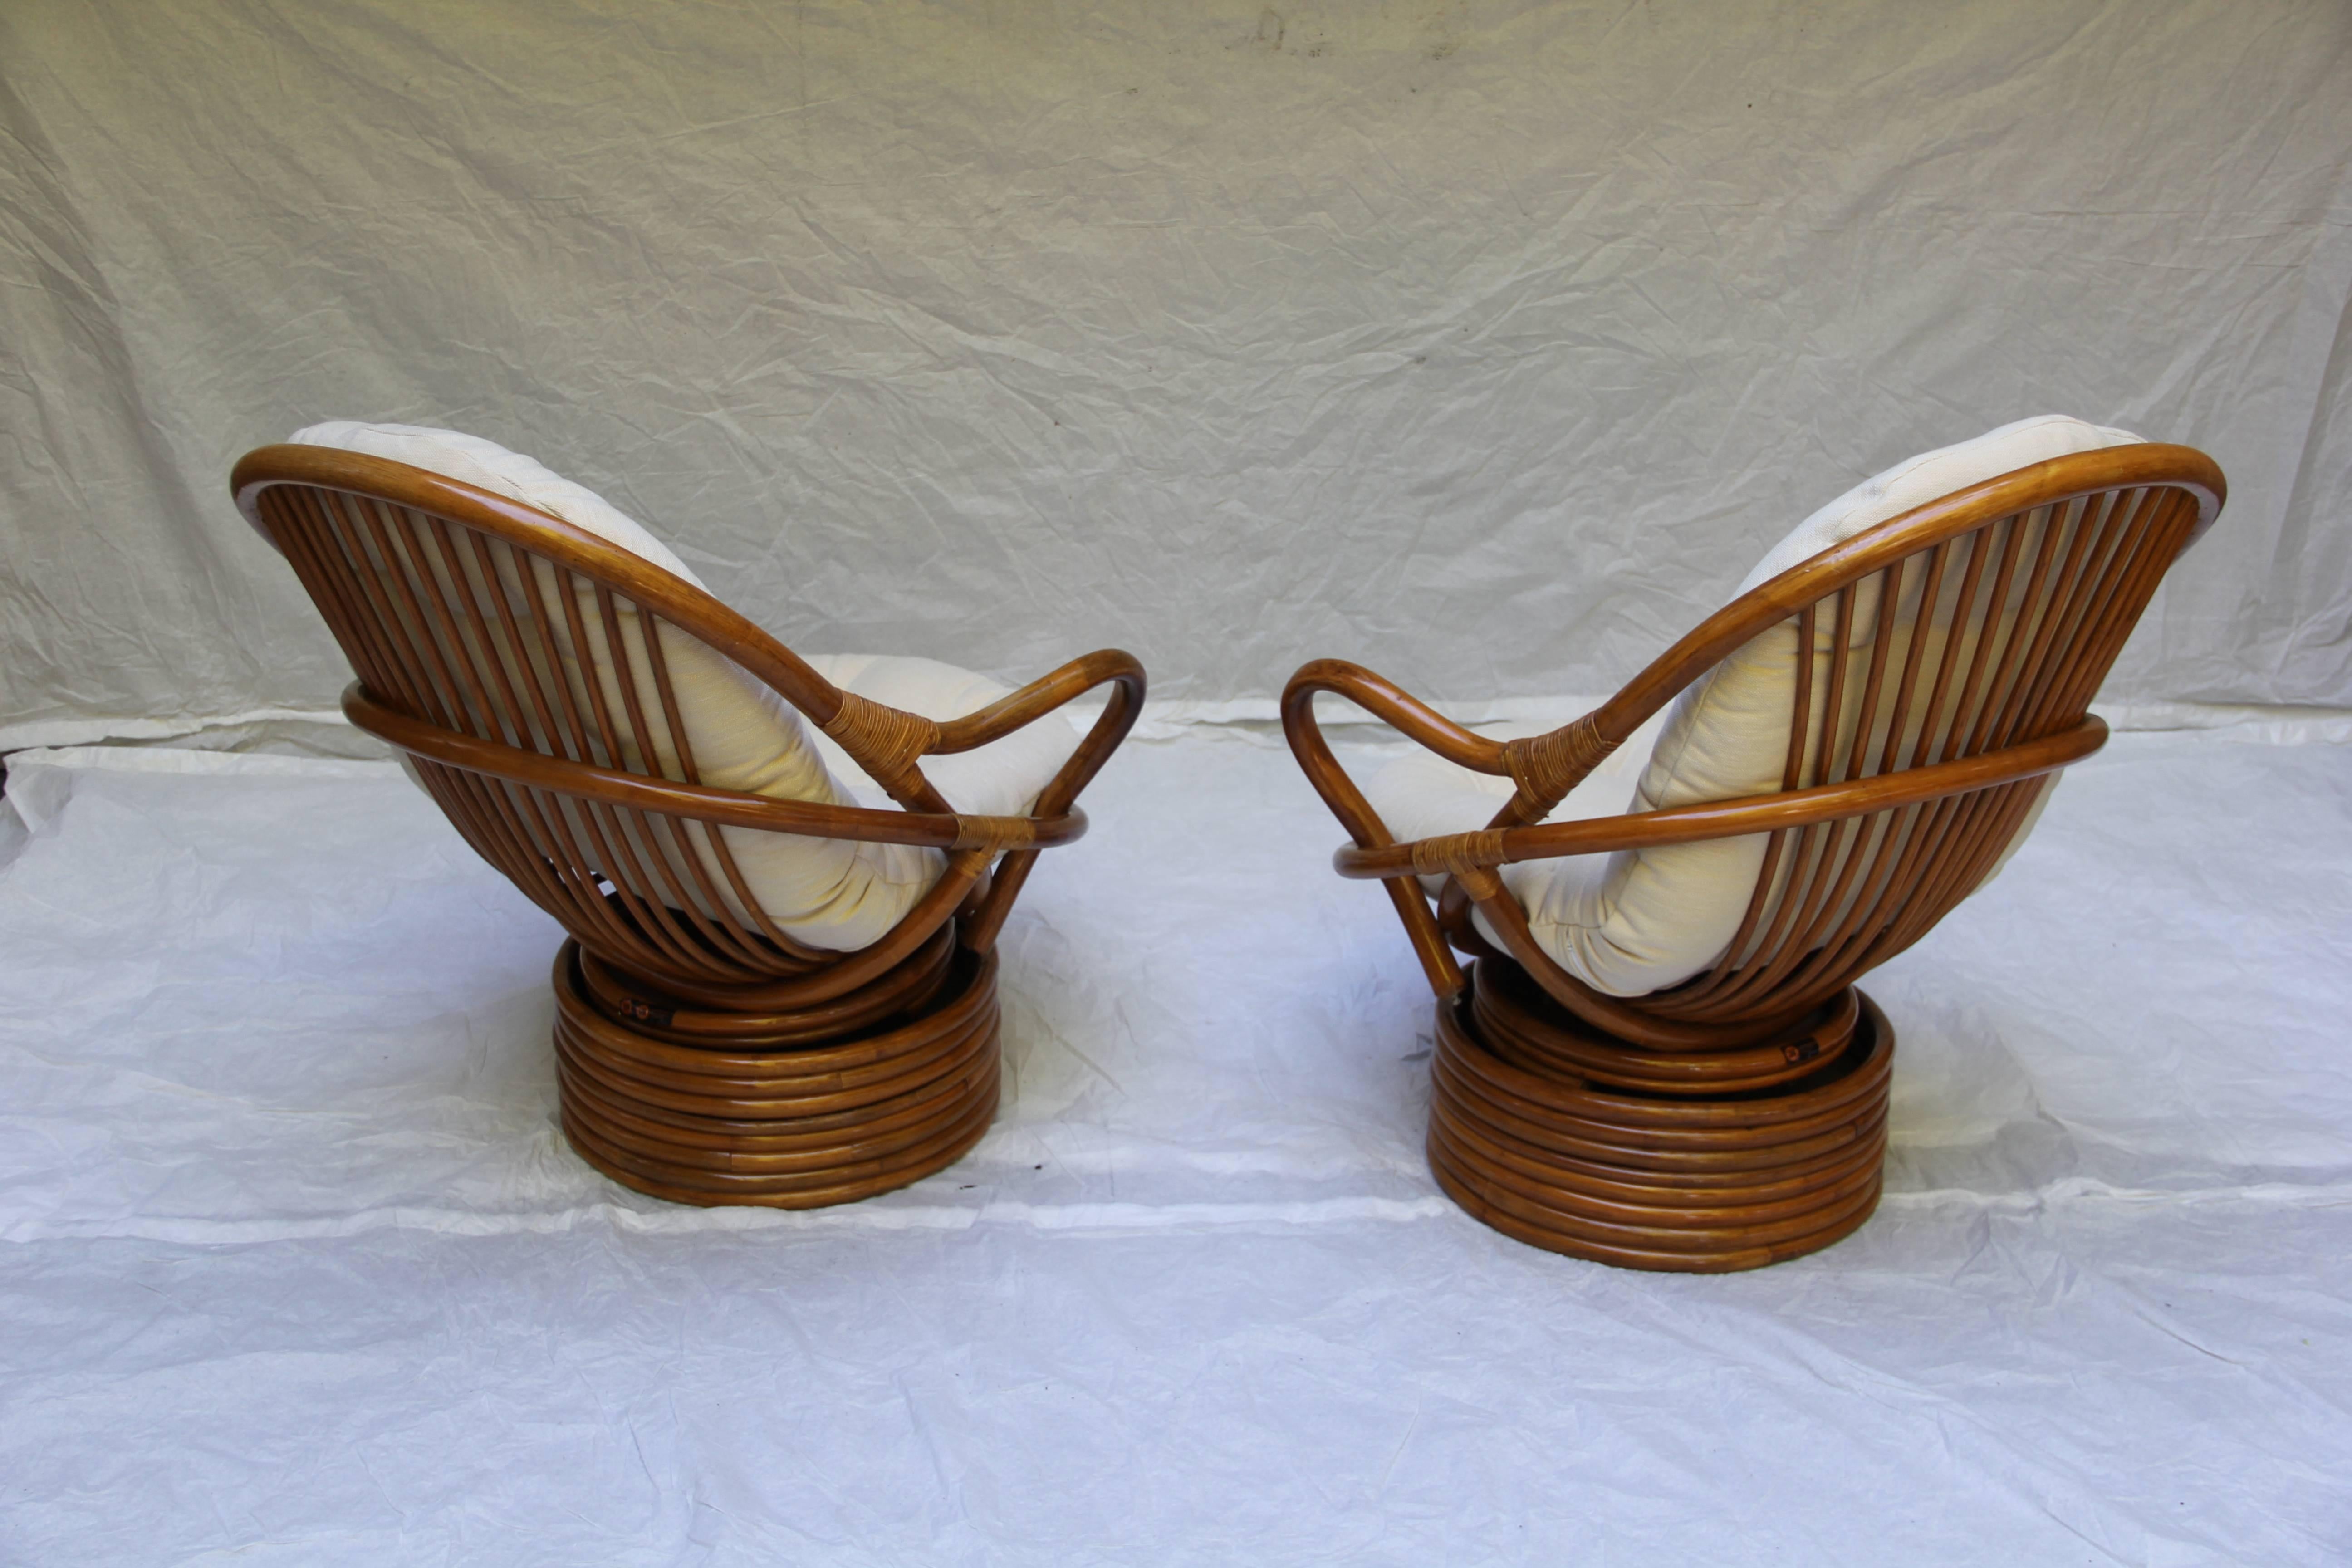 Other Pair of Swivel Bamboo Rattan Lounge Chairs Sun Products, circa 1965, Californian